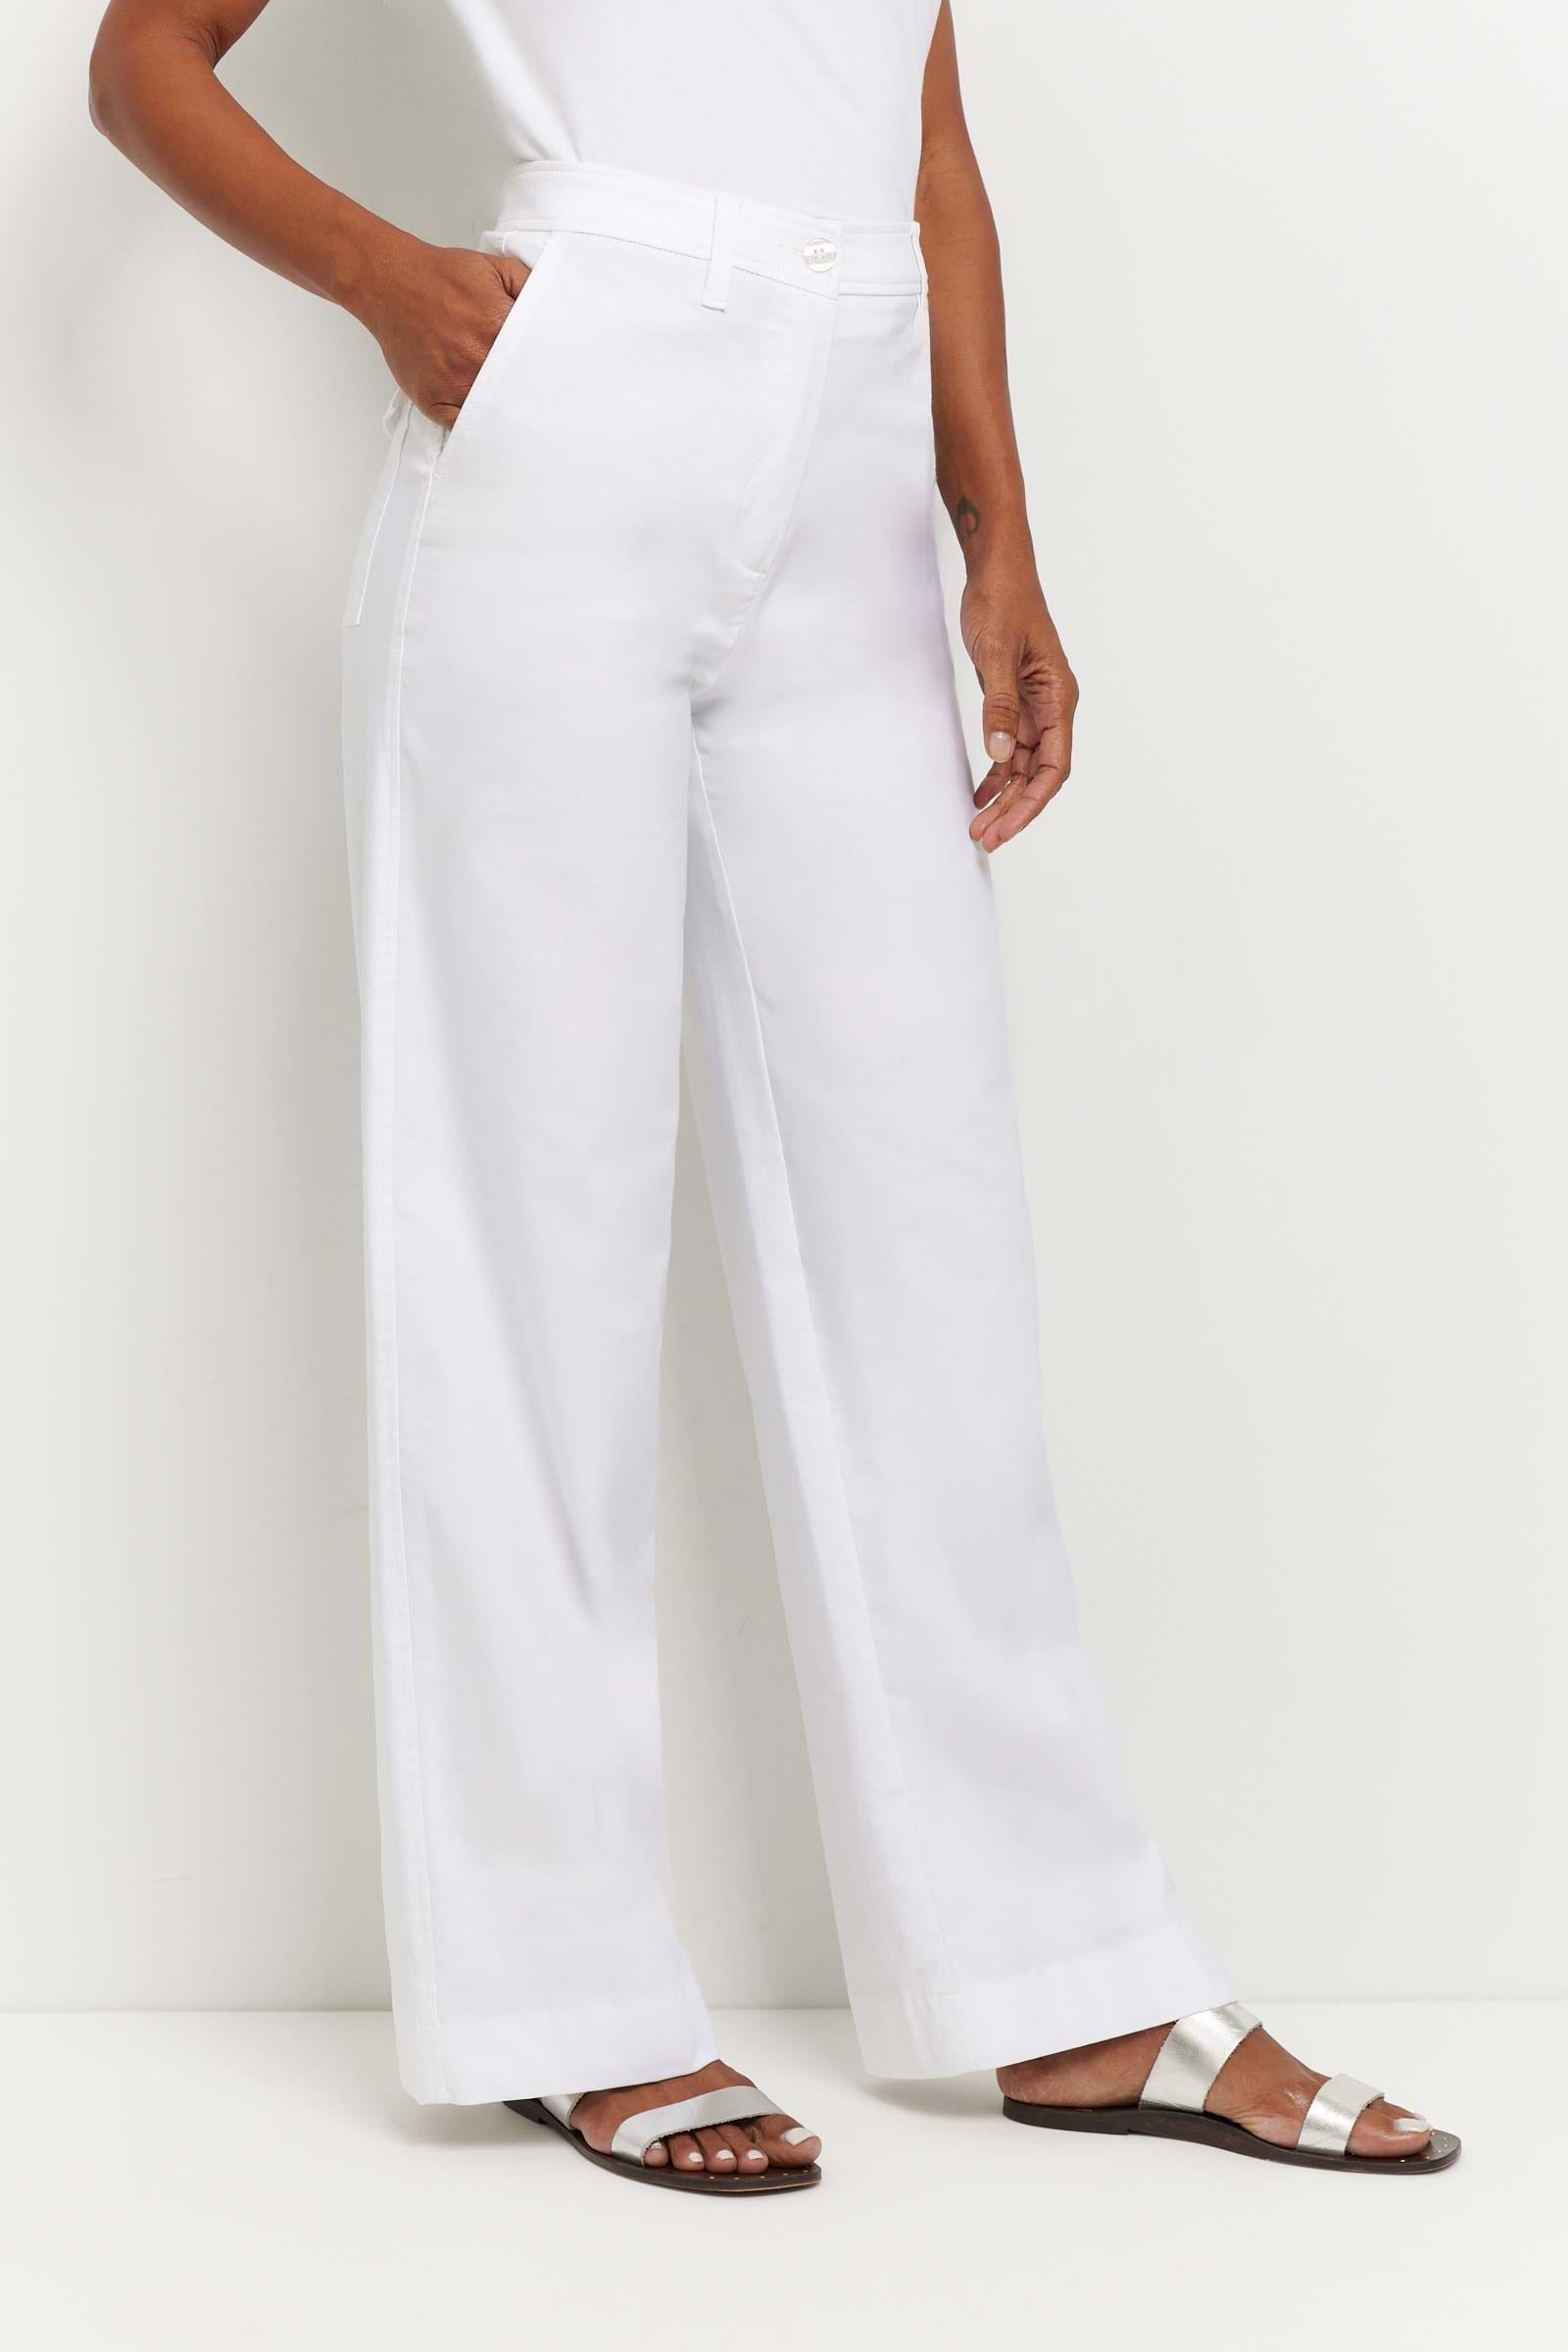 The Best Travel Pants. Woman Showing the Side of a Brooklyn Pant in White.